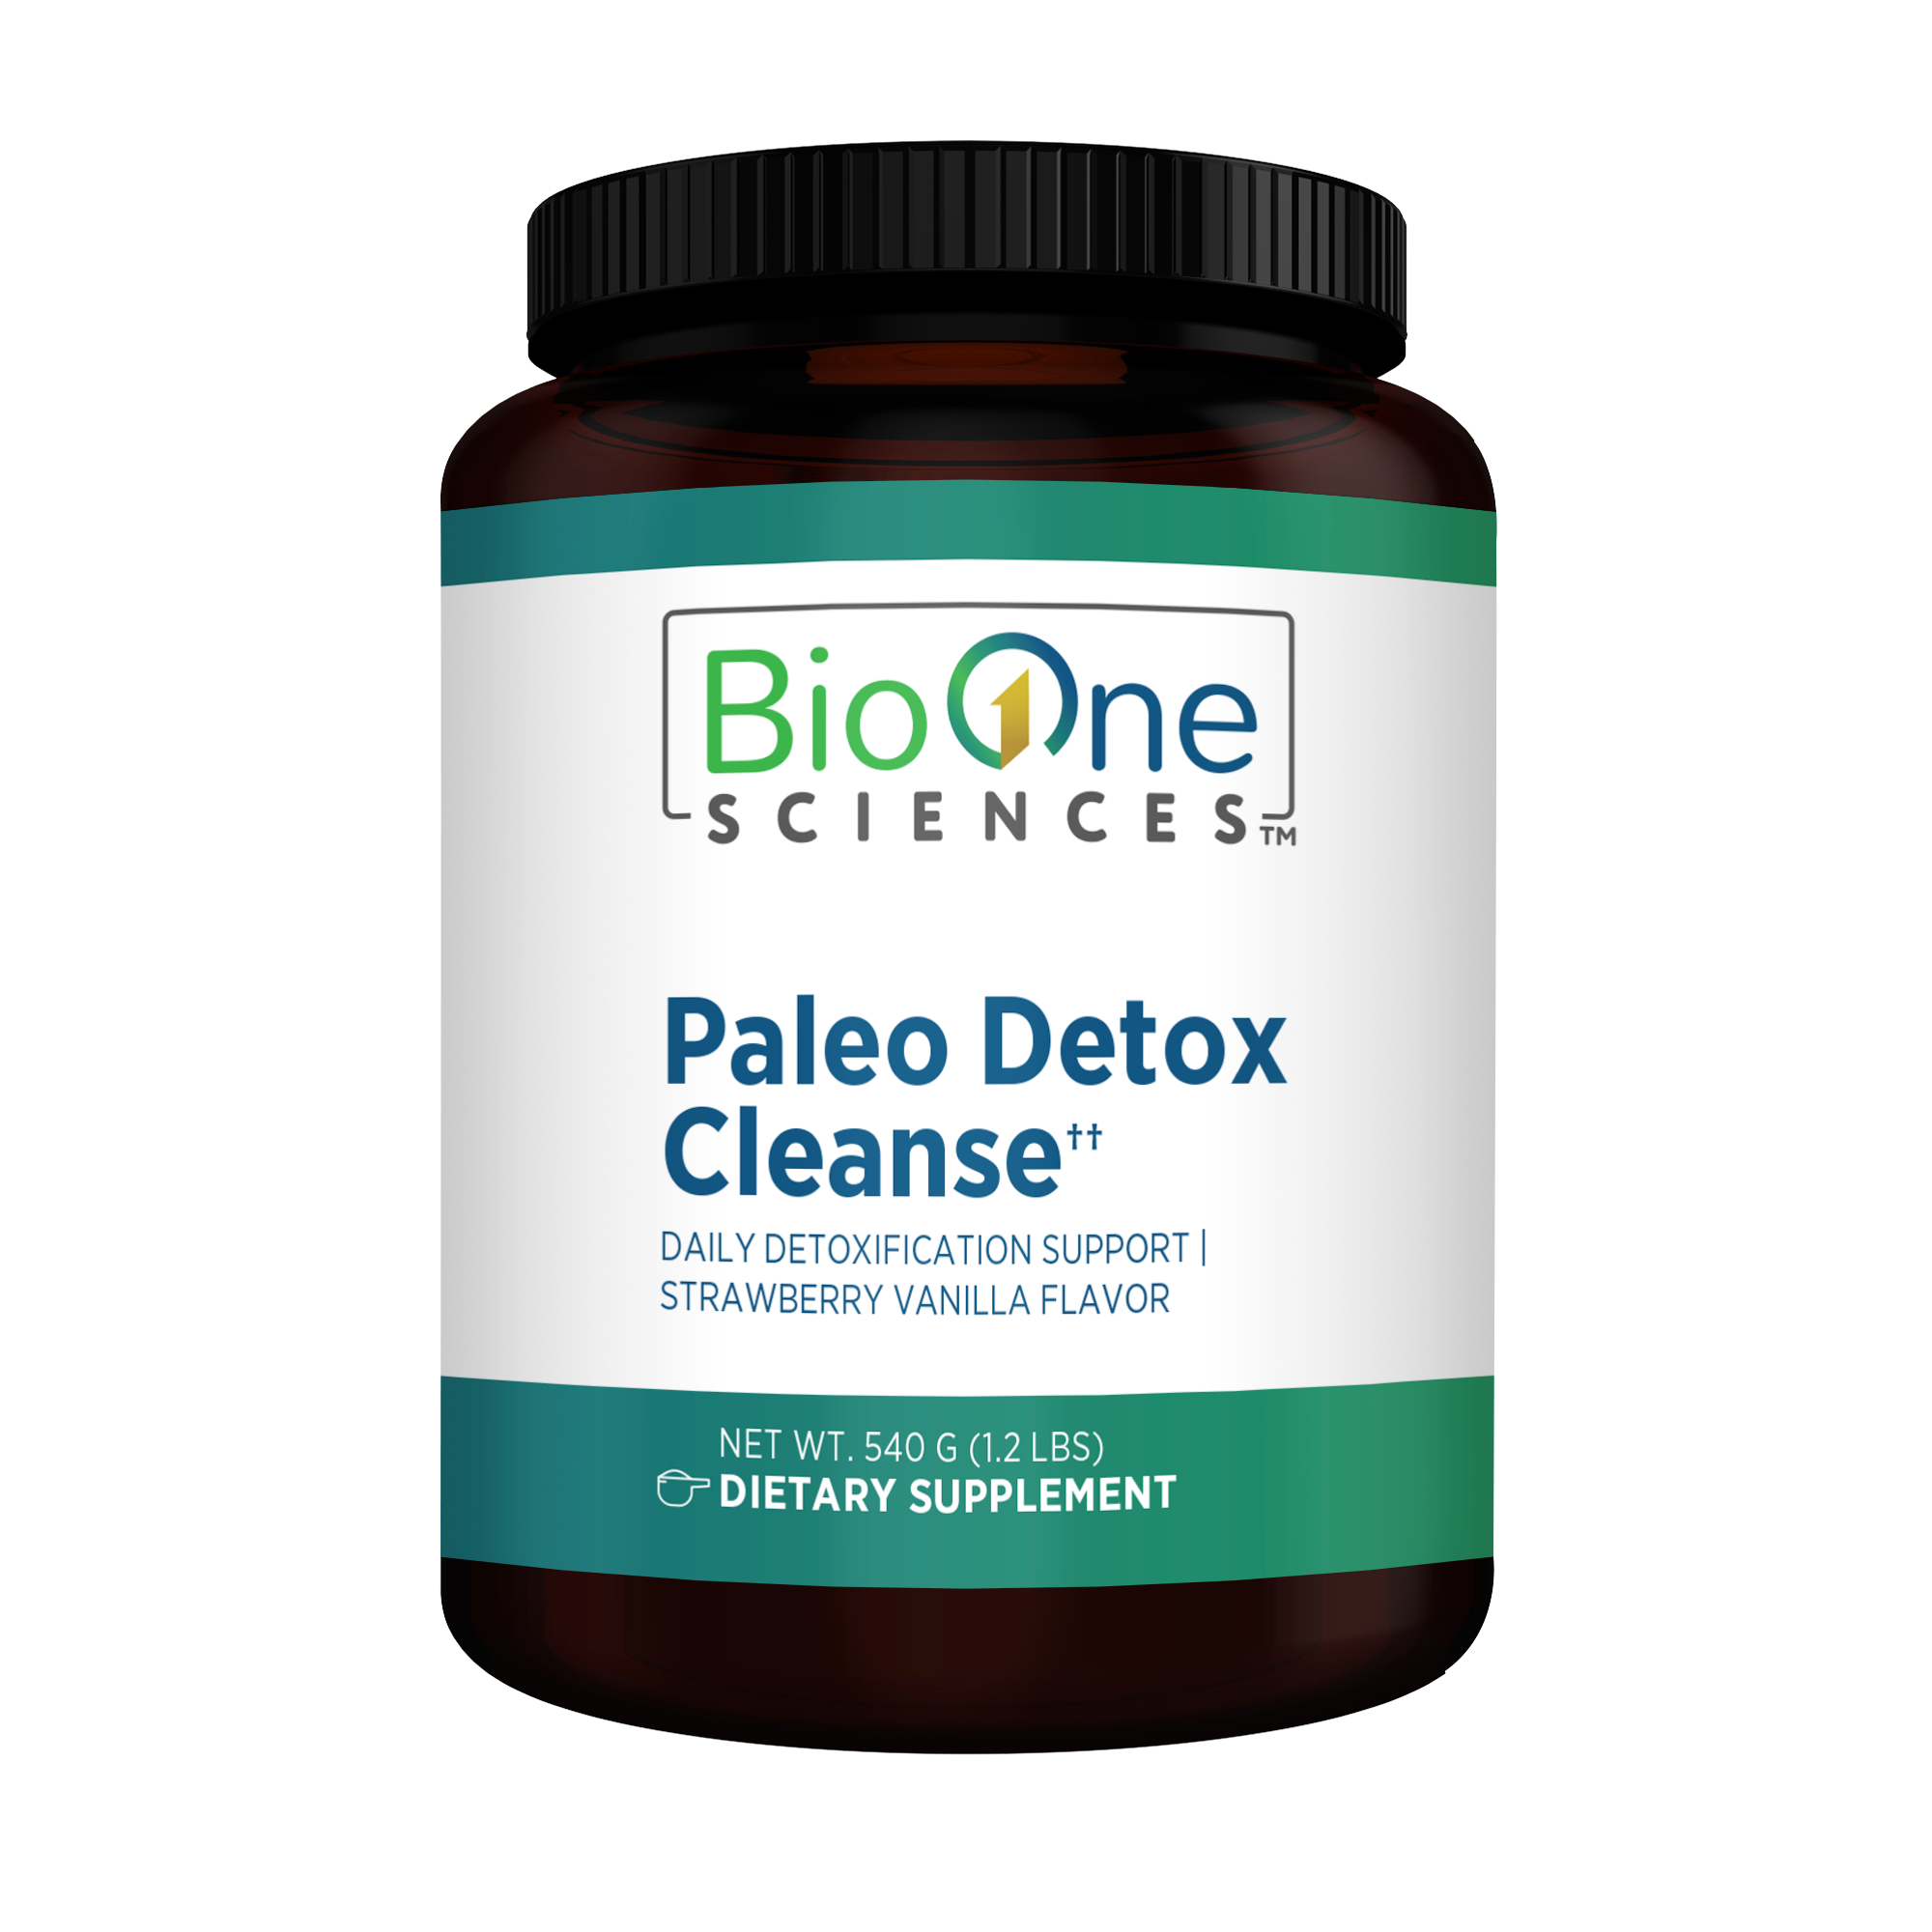 Paleo Detox Cleanse Plus (with Beef Broth Protein)